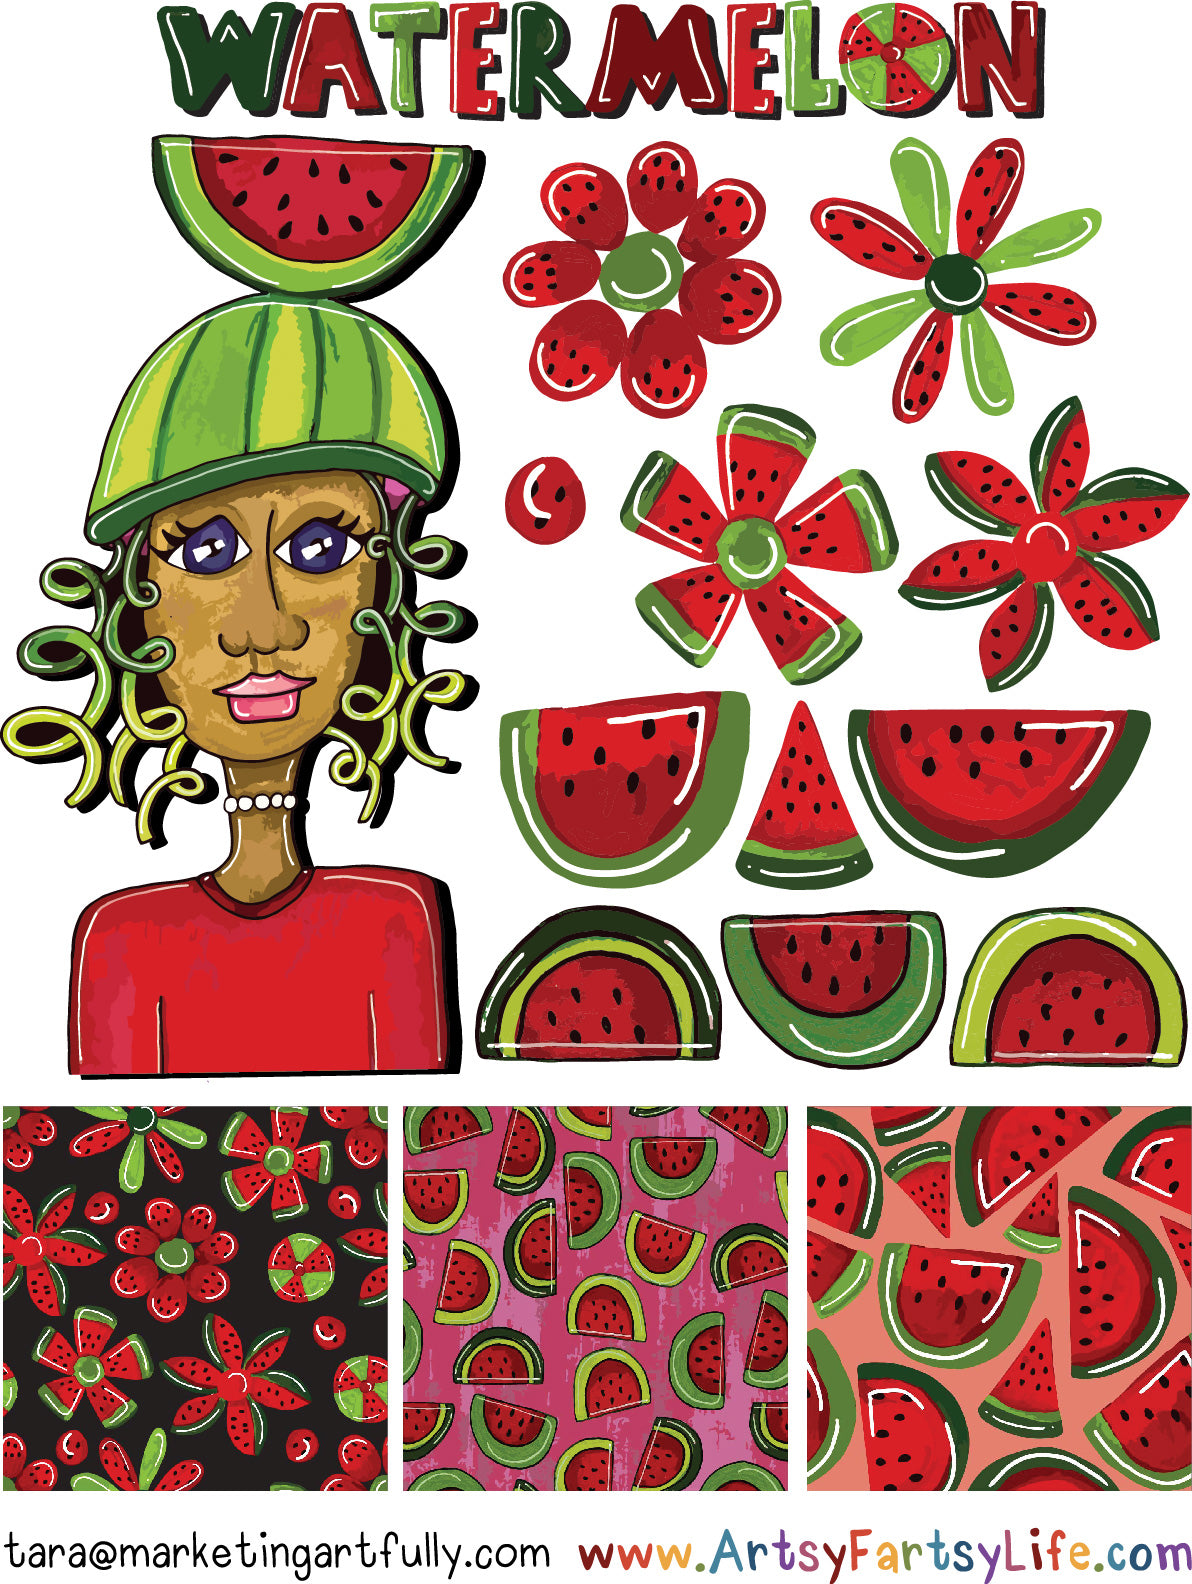 Watermelon Woman Surface Design For Greeting Cards and Stationery